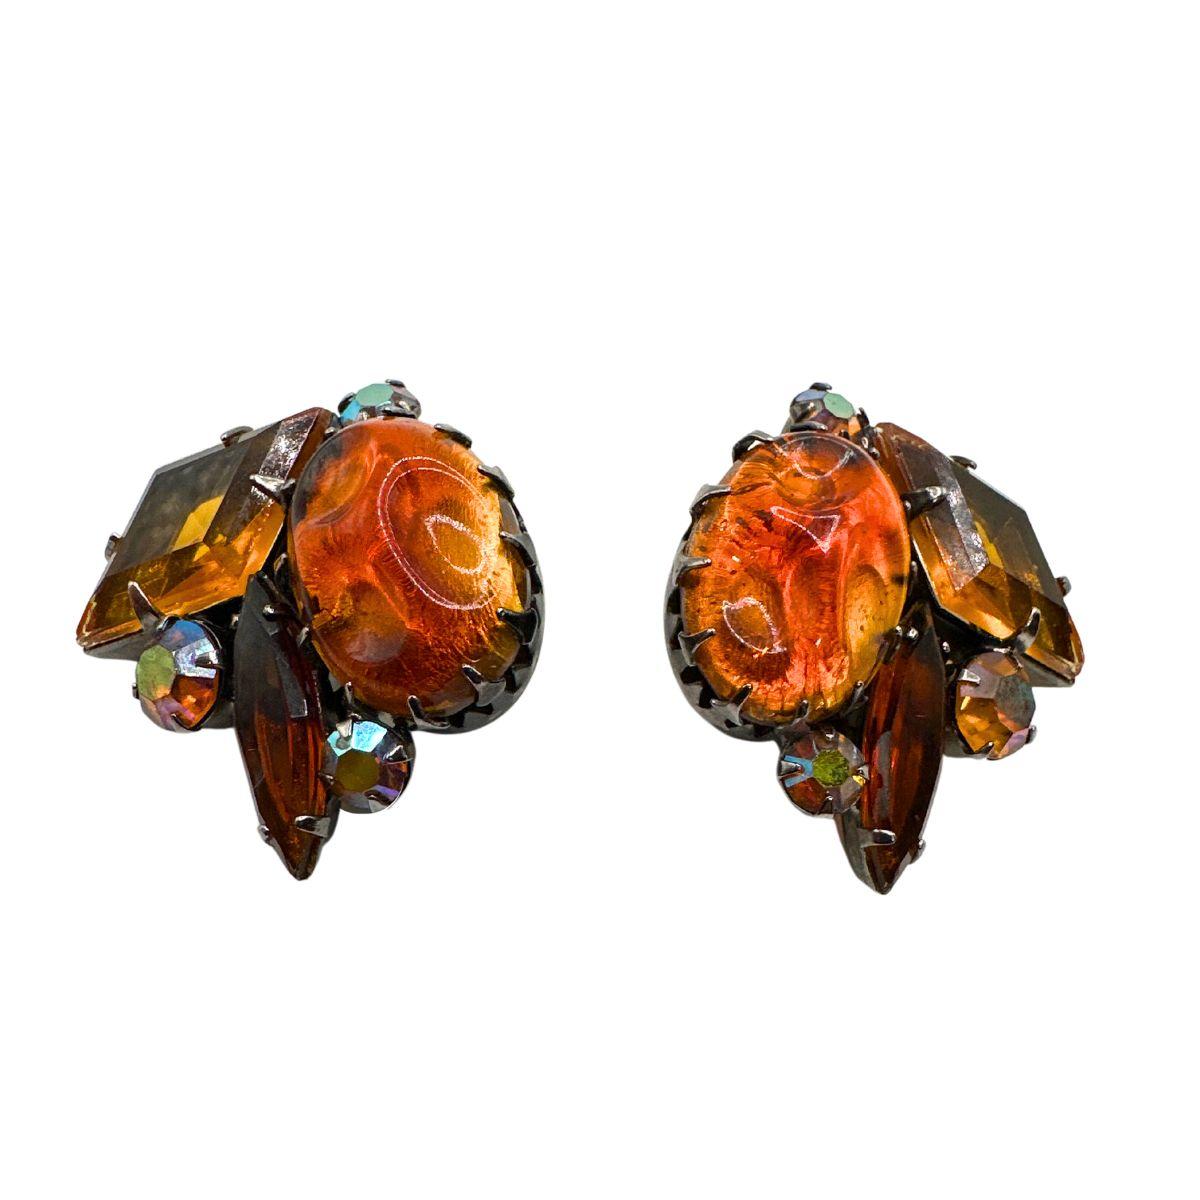 Earring Length : 1:22″

Bin Code: E22 / P2

Add a touch of vintage elegance to your ensemble with these stunning Austrian Orange Cut Glass & Rhinestone Earrings. The vibrant orange hue of the glass stones instantly catches the eye and adds a pop of